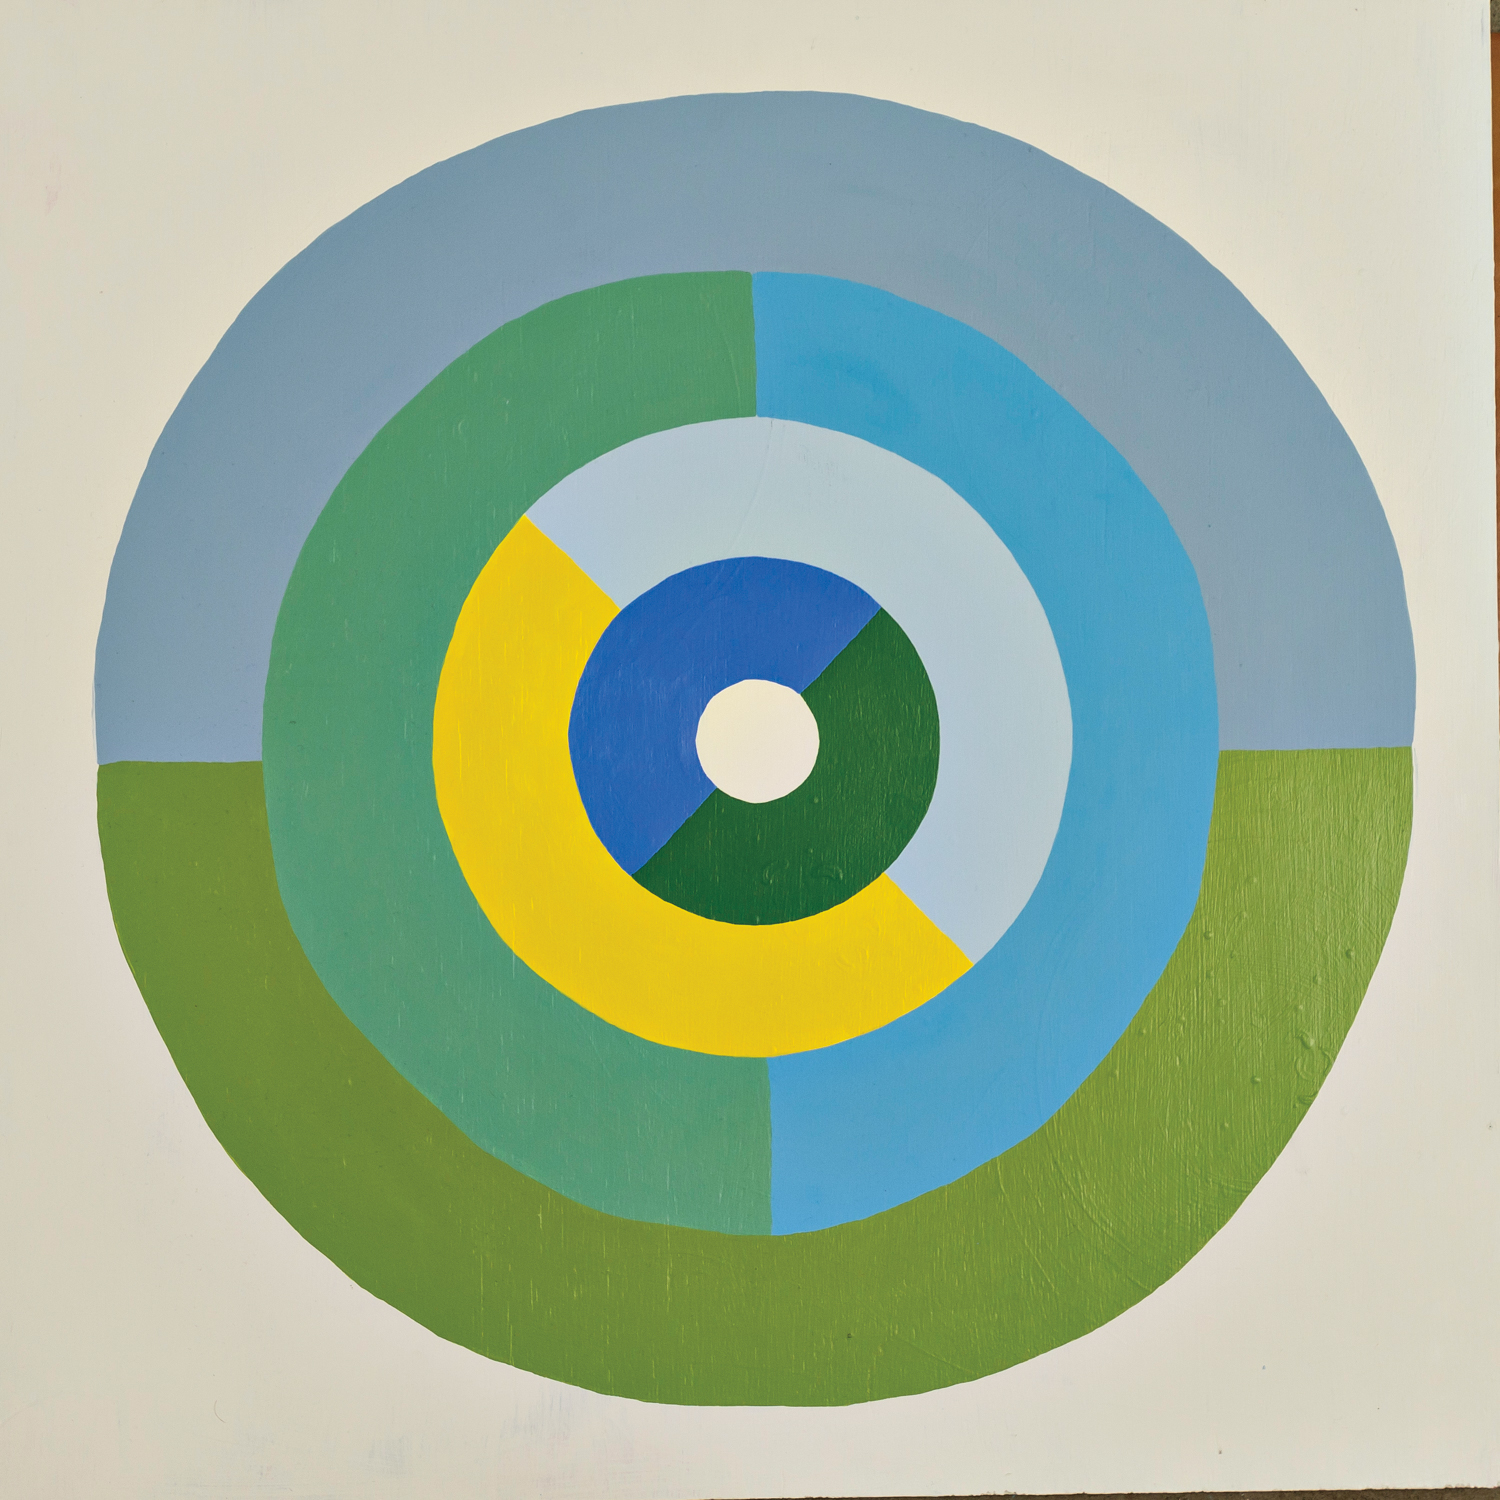 Artwork featuring concentric circles in shades of blue, green and yellow.